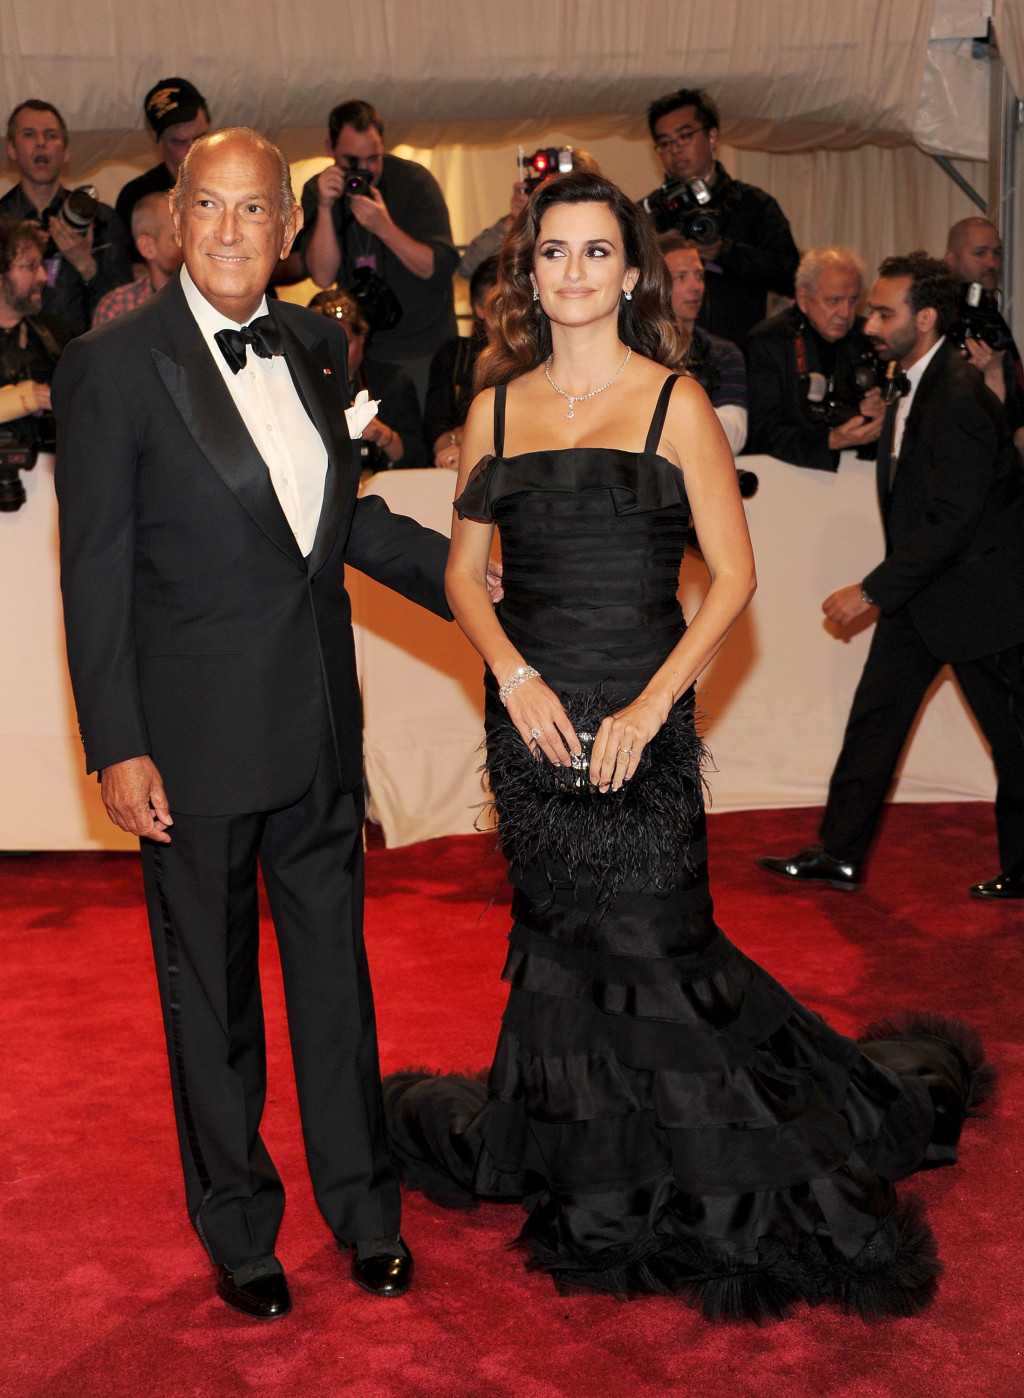 Designer Oscar de la Renta and actress Penelope Cruz attend the "Alexander McQueen: Savage Beauty" Costume Institute Gala at The Metropolitan Museum of Art on May 2, 2011 in New York City. (Photo by Larry Busacca/Getty Images North America)